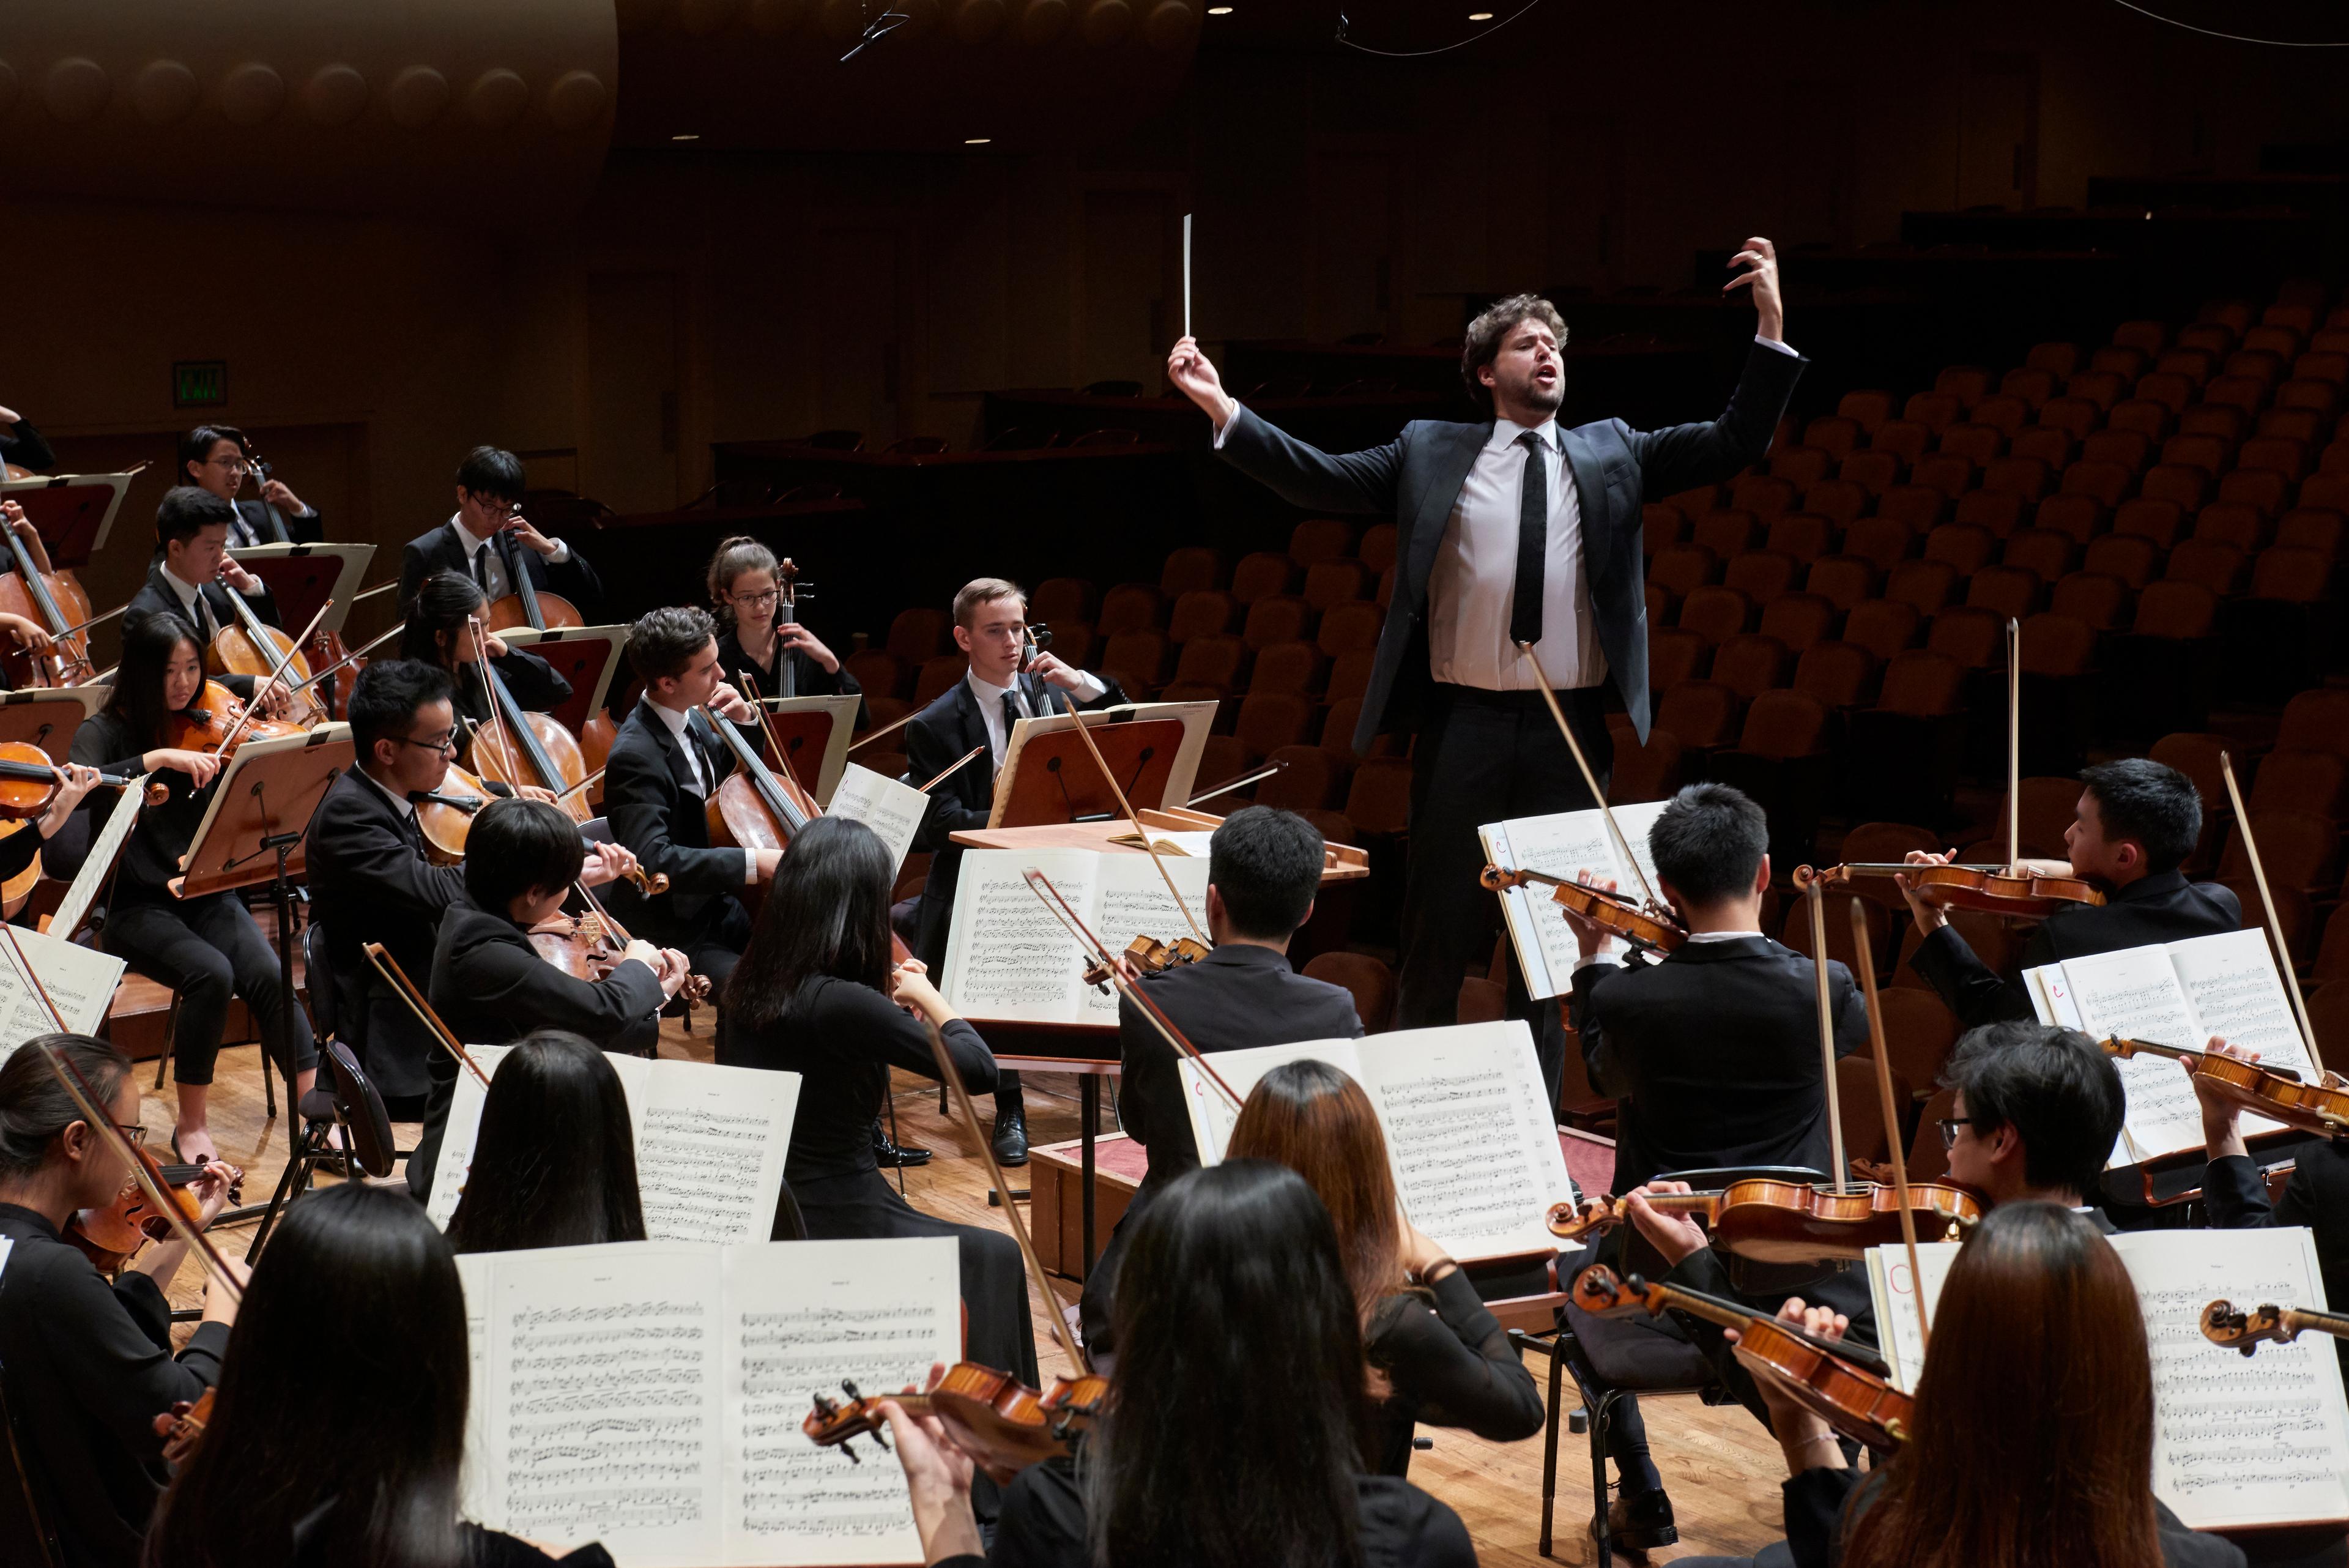 Christian Reif conducting the orchestra on stage